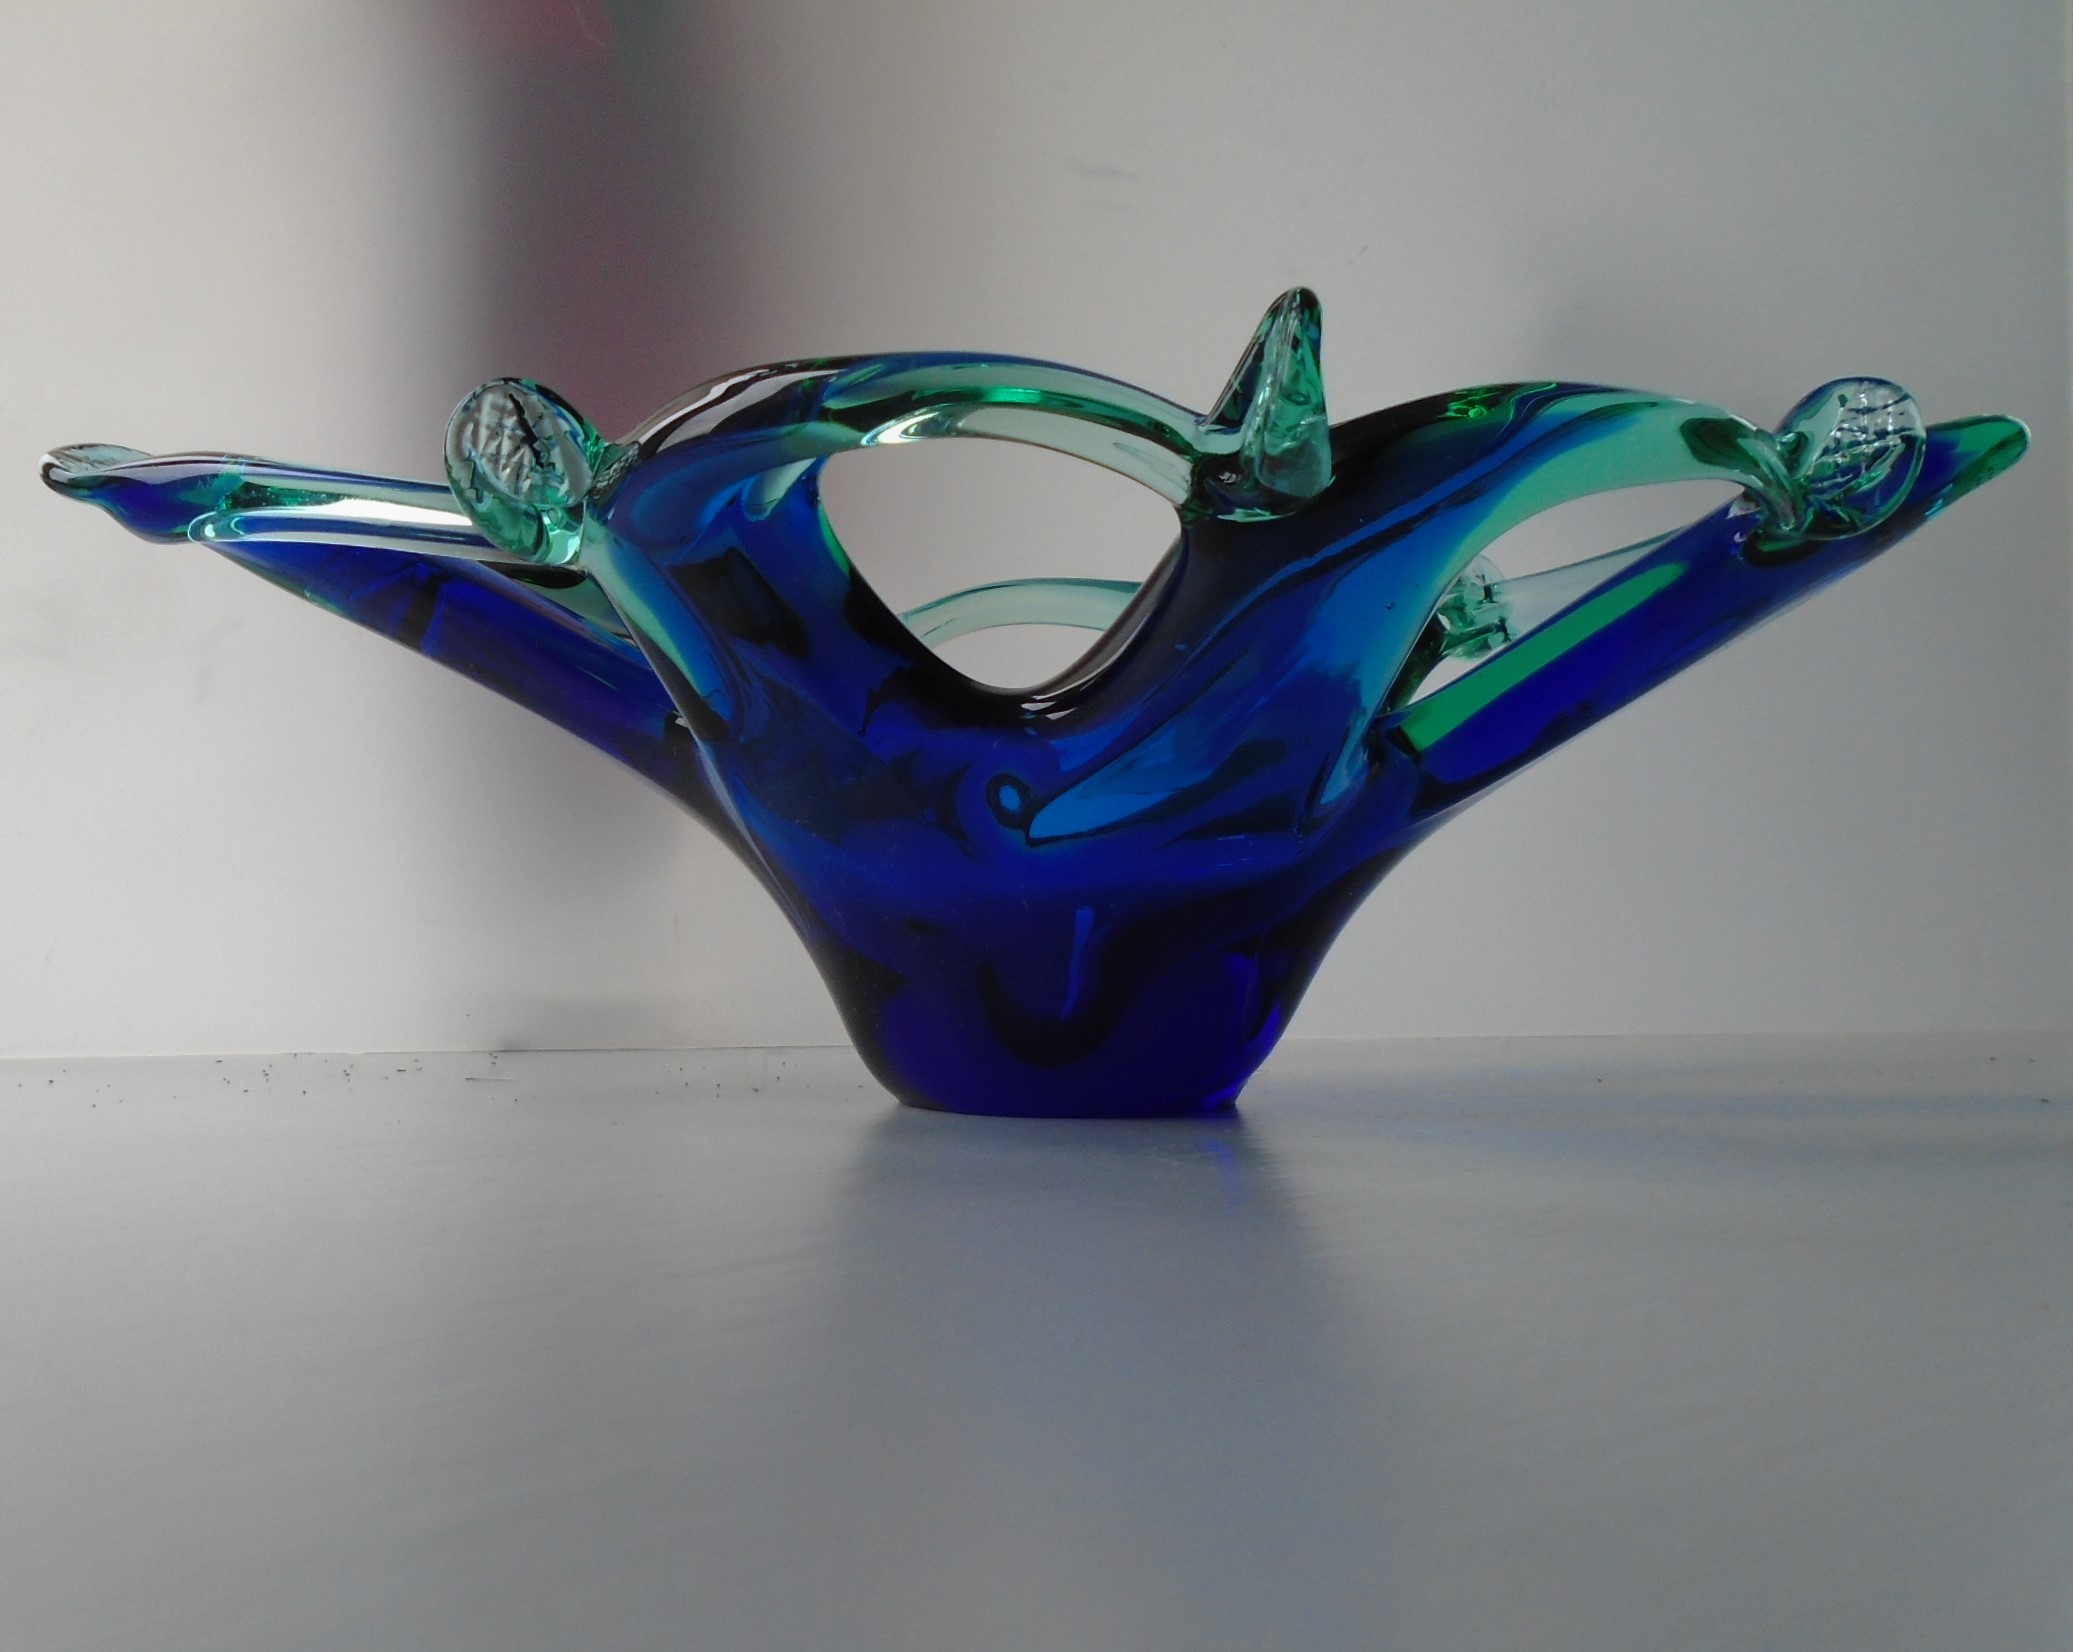 MURANO STYLE ELONGATED BOWL IN BLUE AND TURQUOISE GLASS WITH PERFORATED RIM.